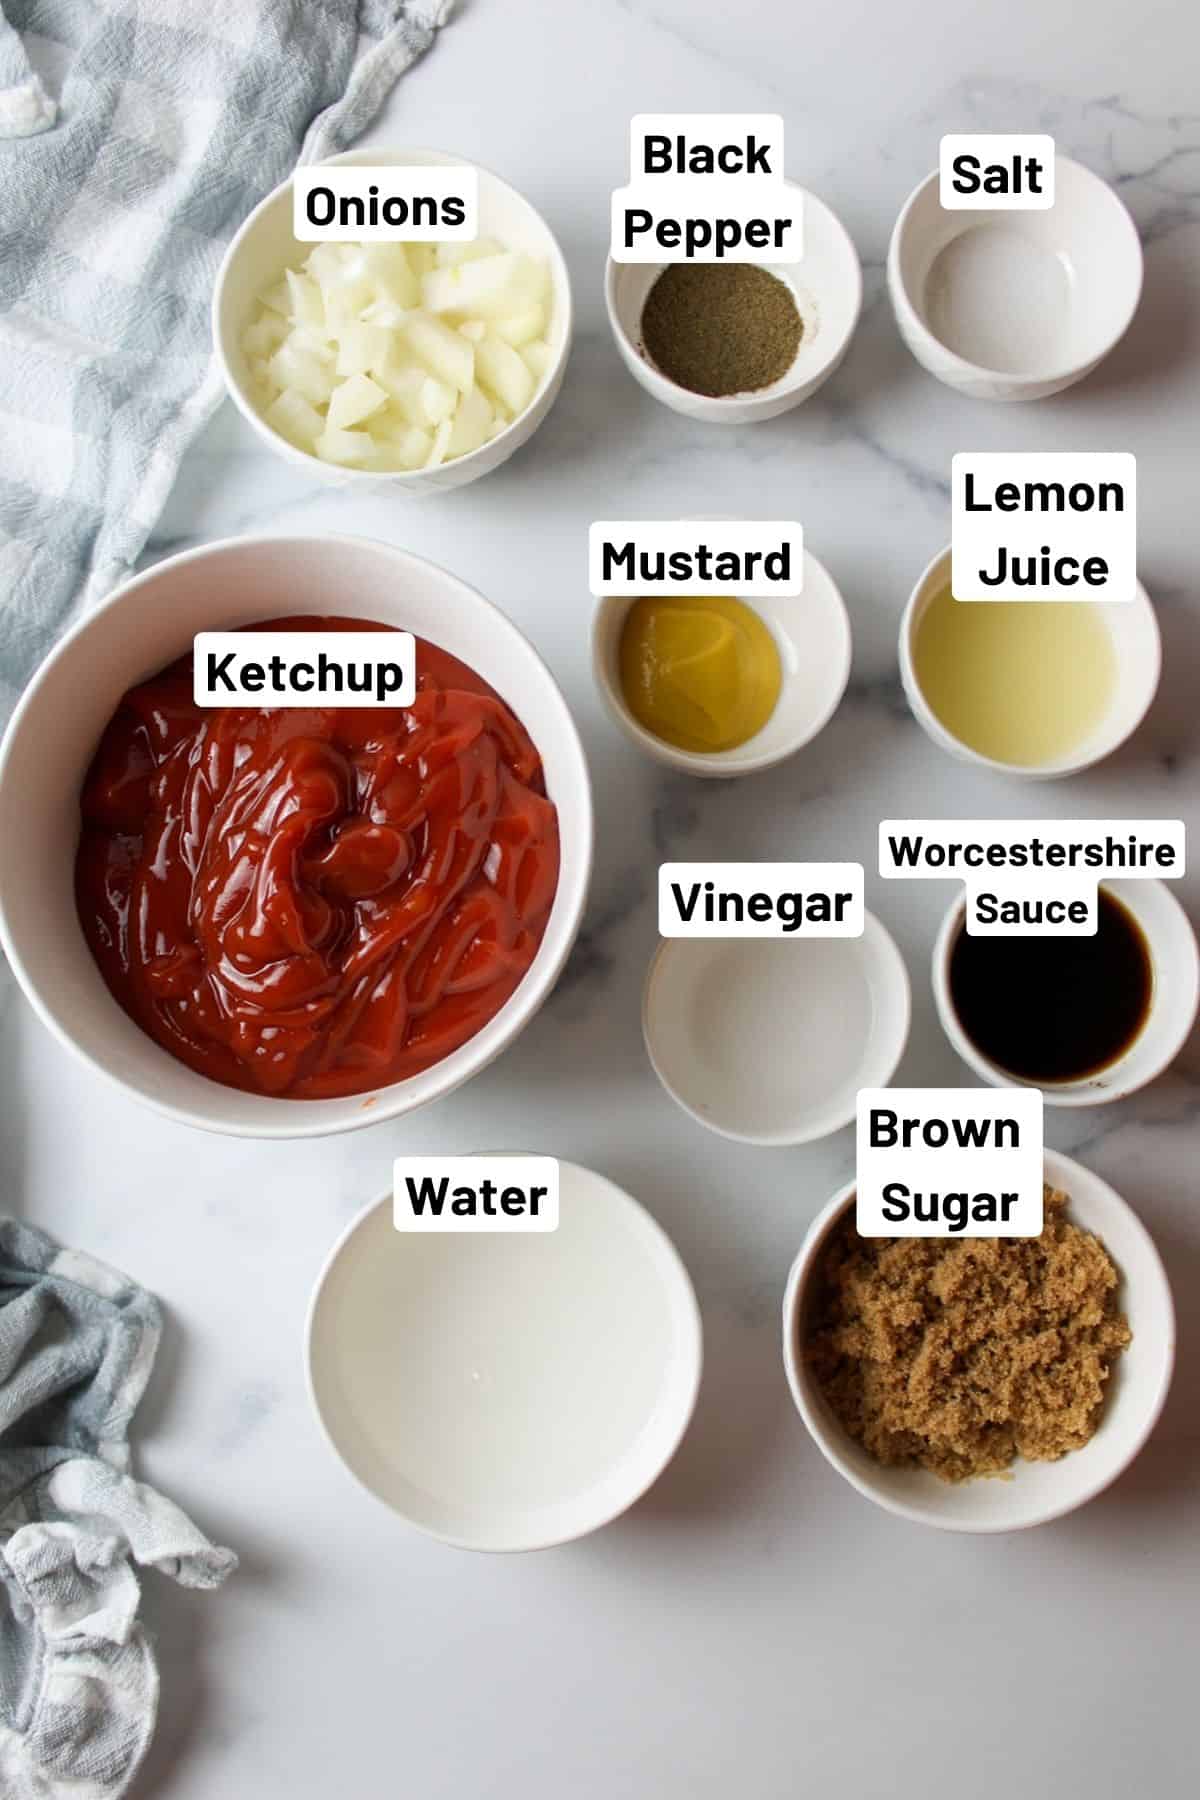 labeled ingredients needed to make barbecue sauce.